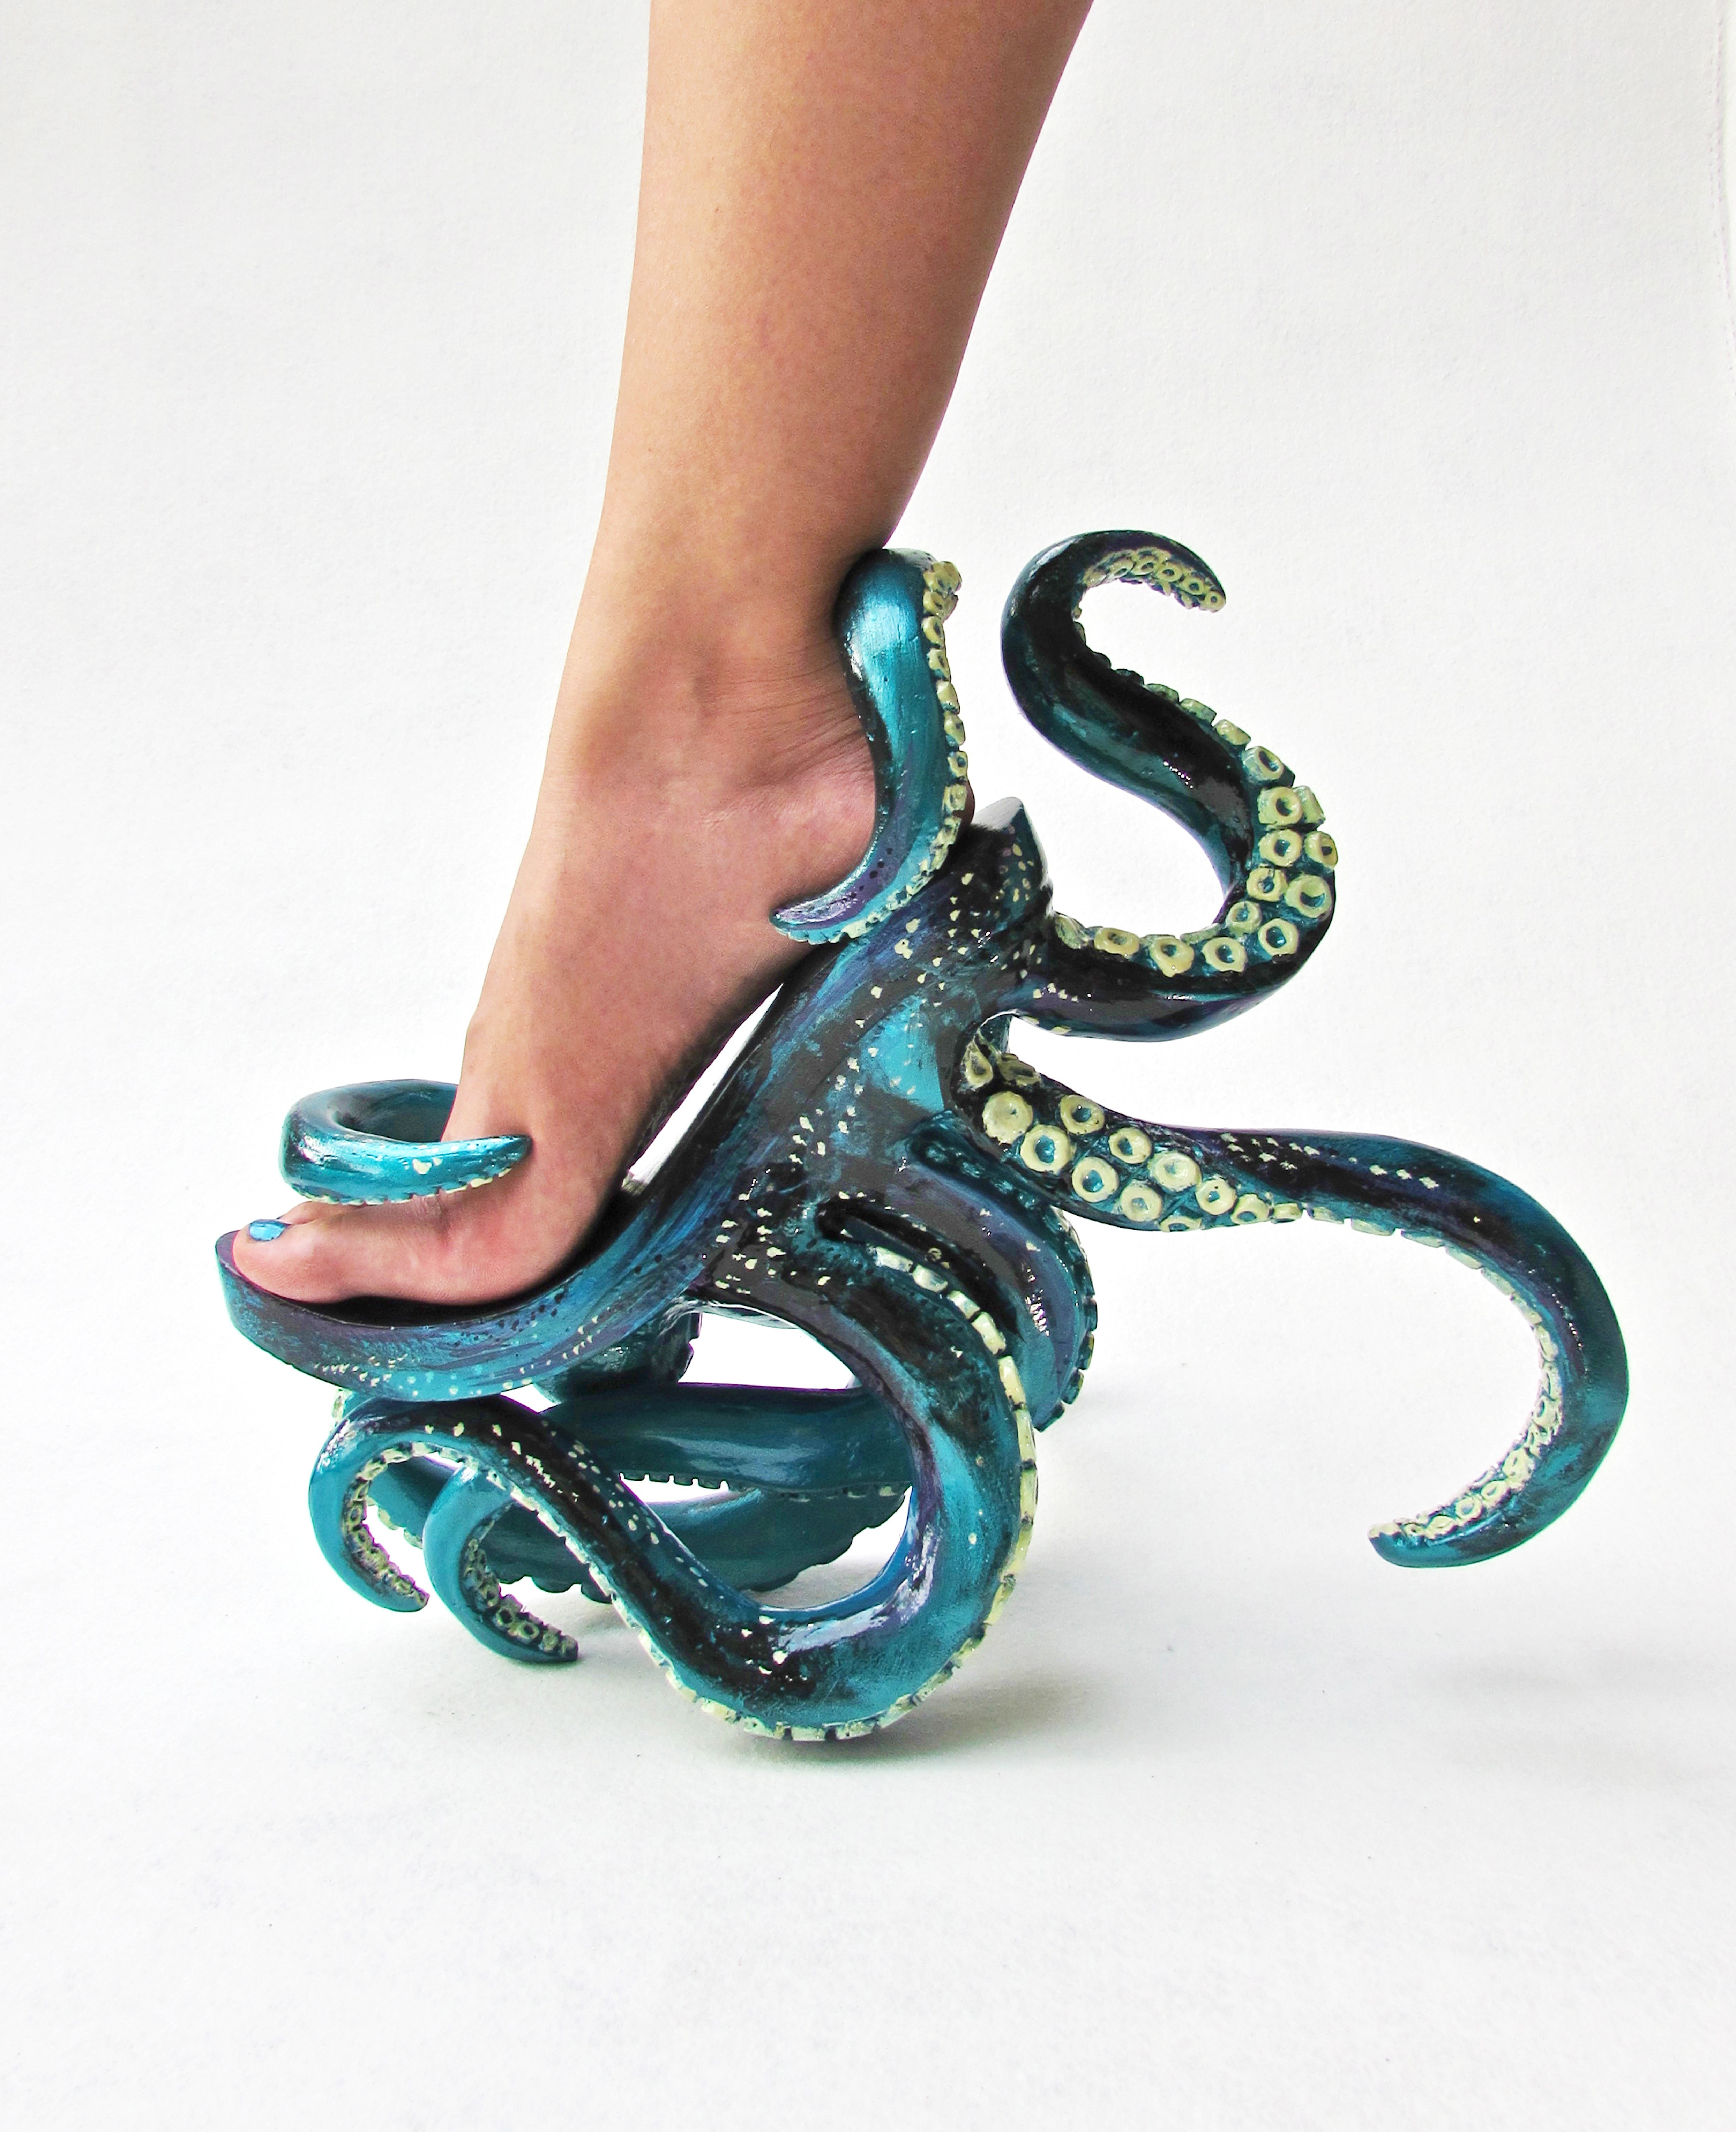 Kermit Tesoro’s unique shoe designs won the admiration of Lady Gaga, among other celebrities. Pictured here is the Polypodis, inspired by cephalopods floating in water.